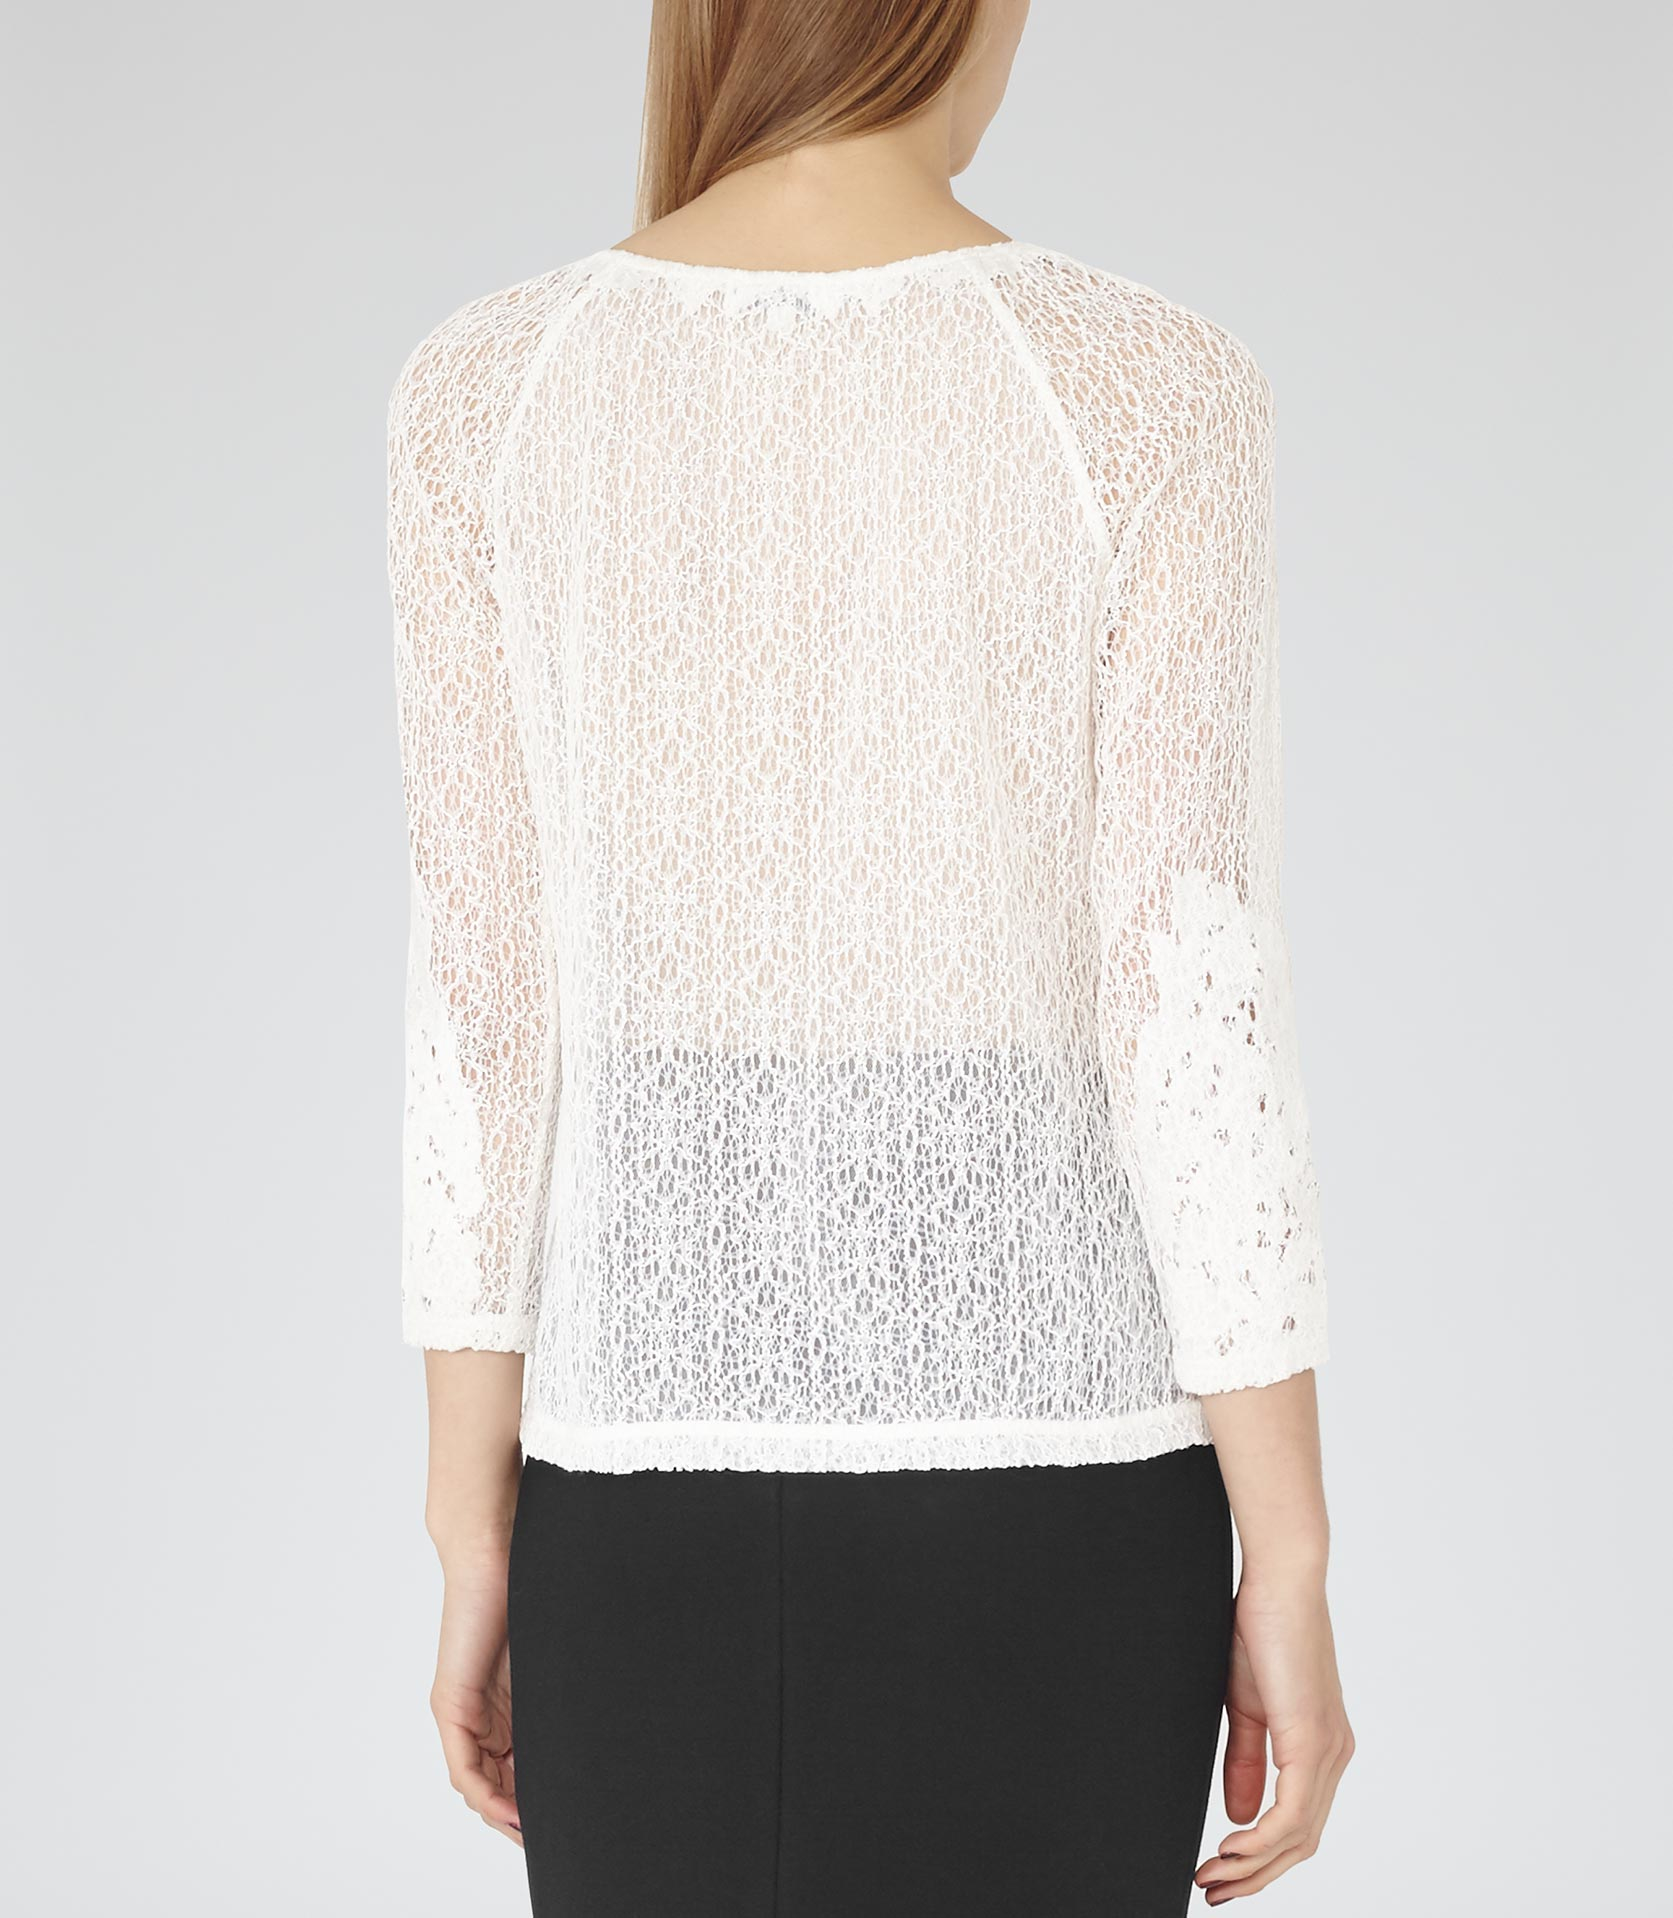 Reiss Shell Lace Top in White - Lyst